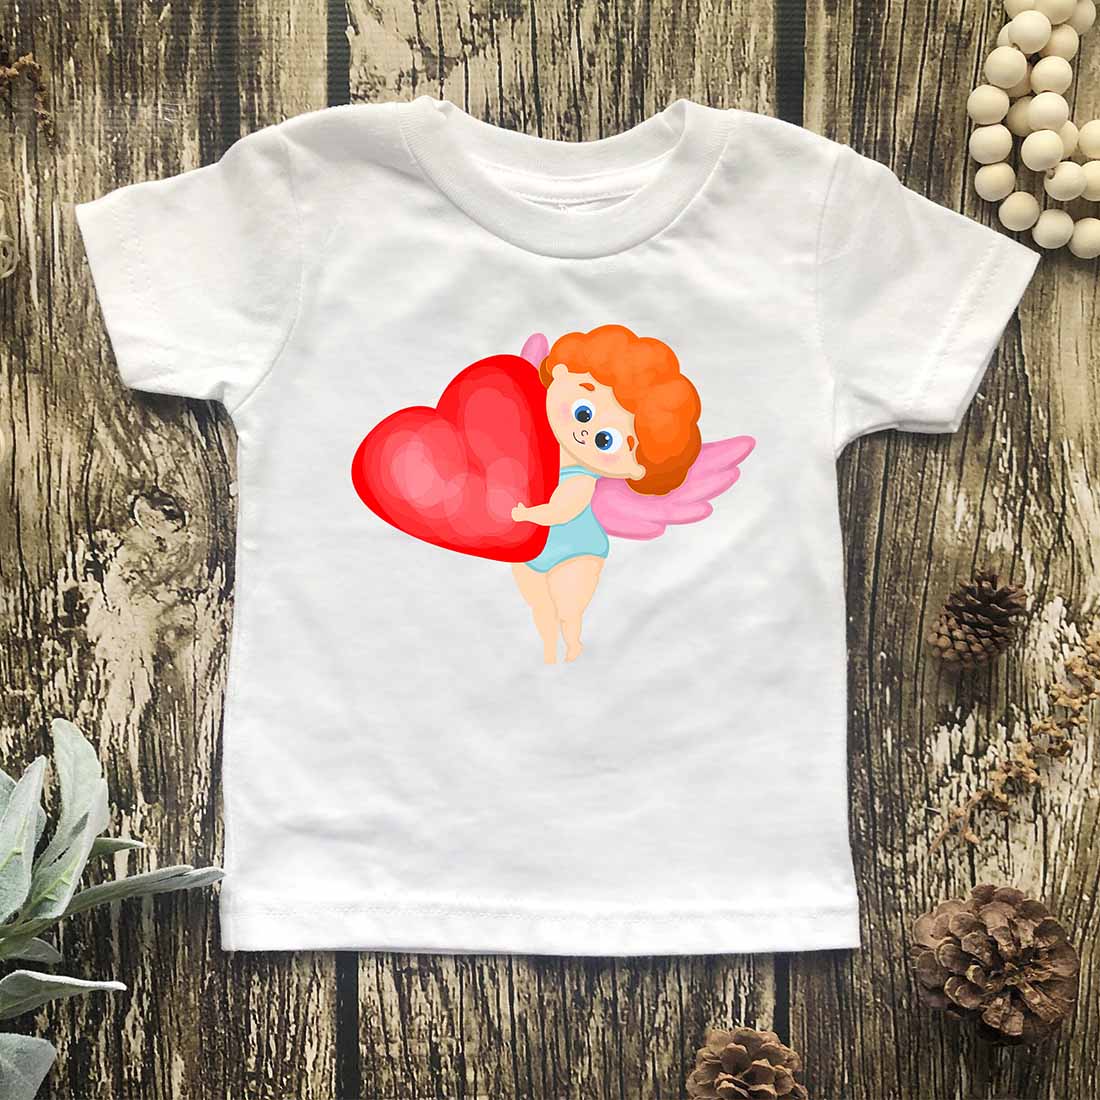 T-shirt Sublimation of Cupid in Love Design cover image.